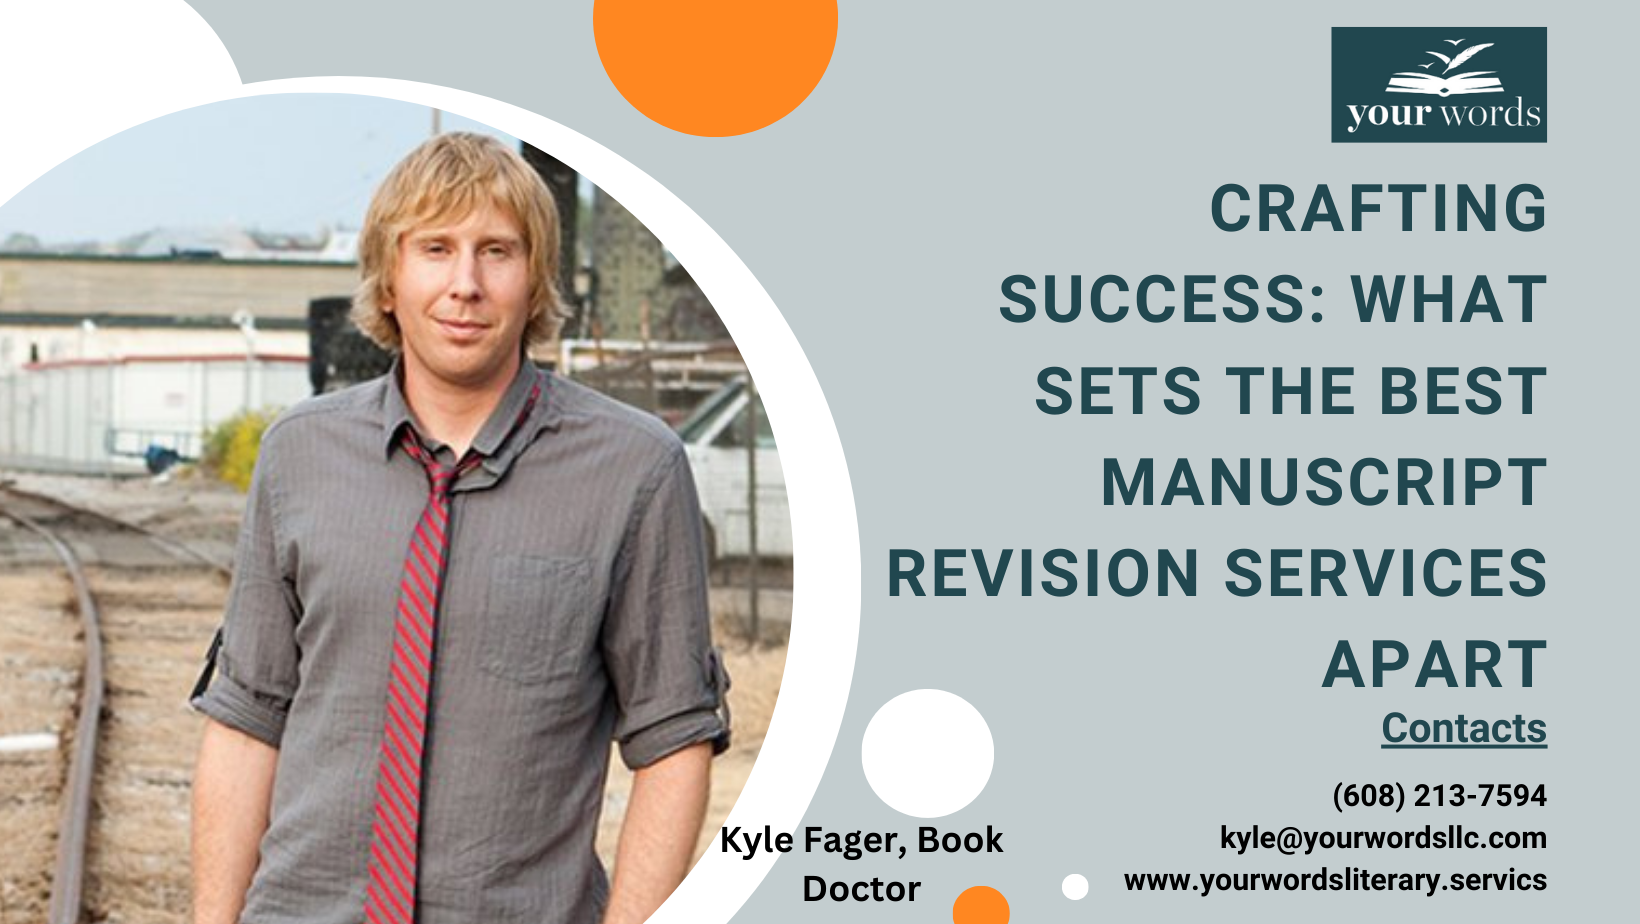 Crafting Success: What Sets the Best Manuscript Revision Services Apart